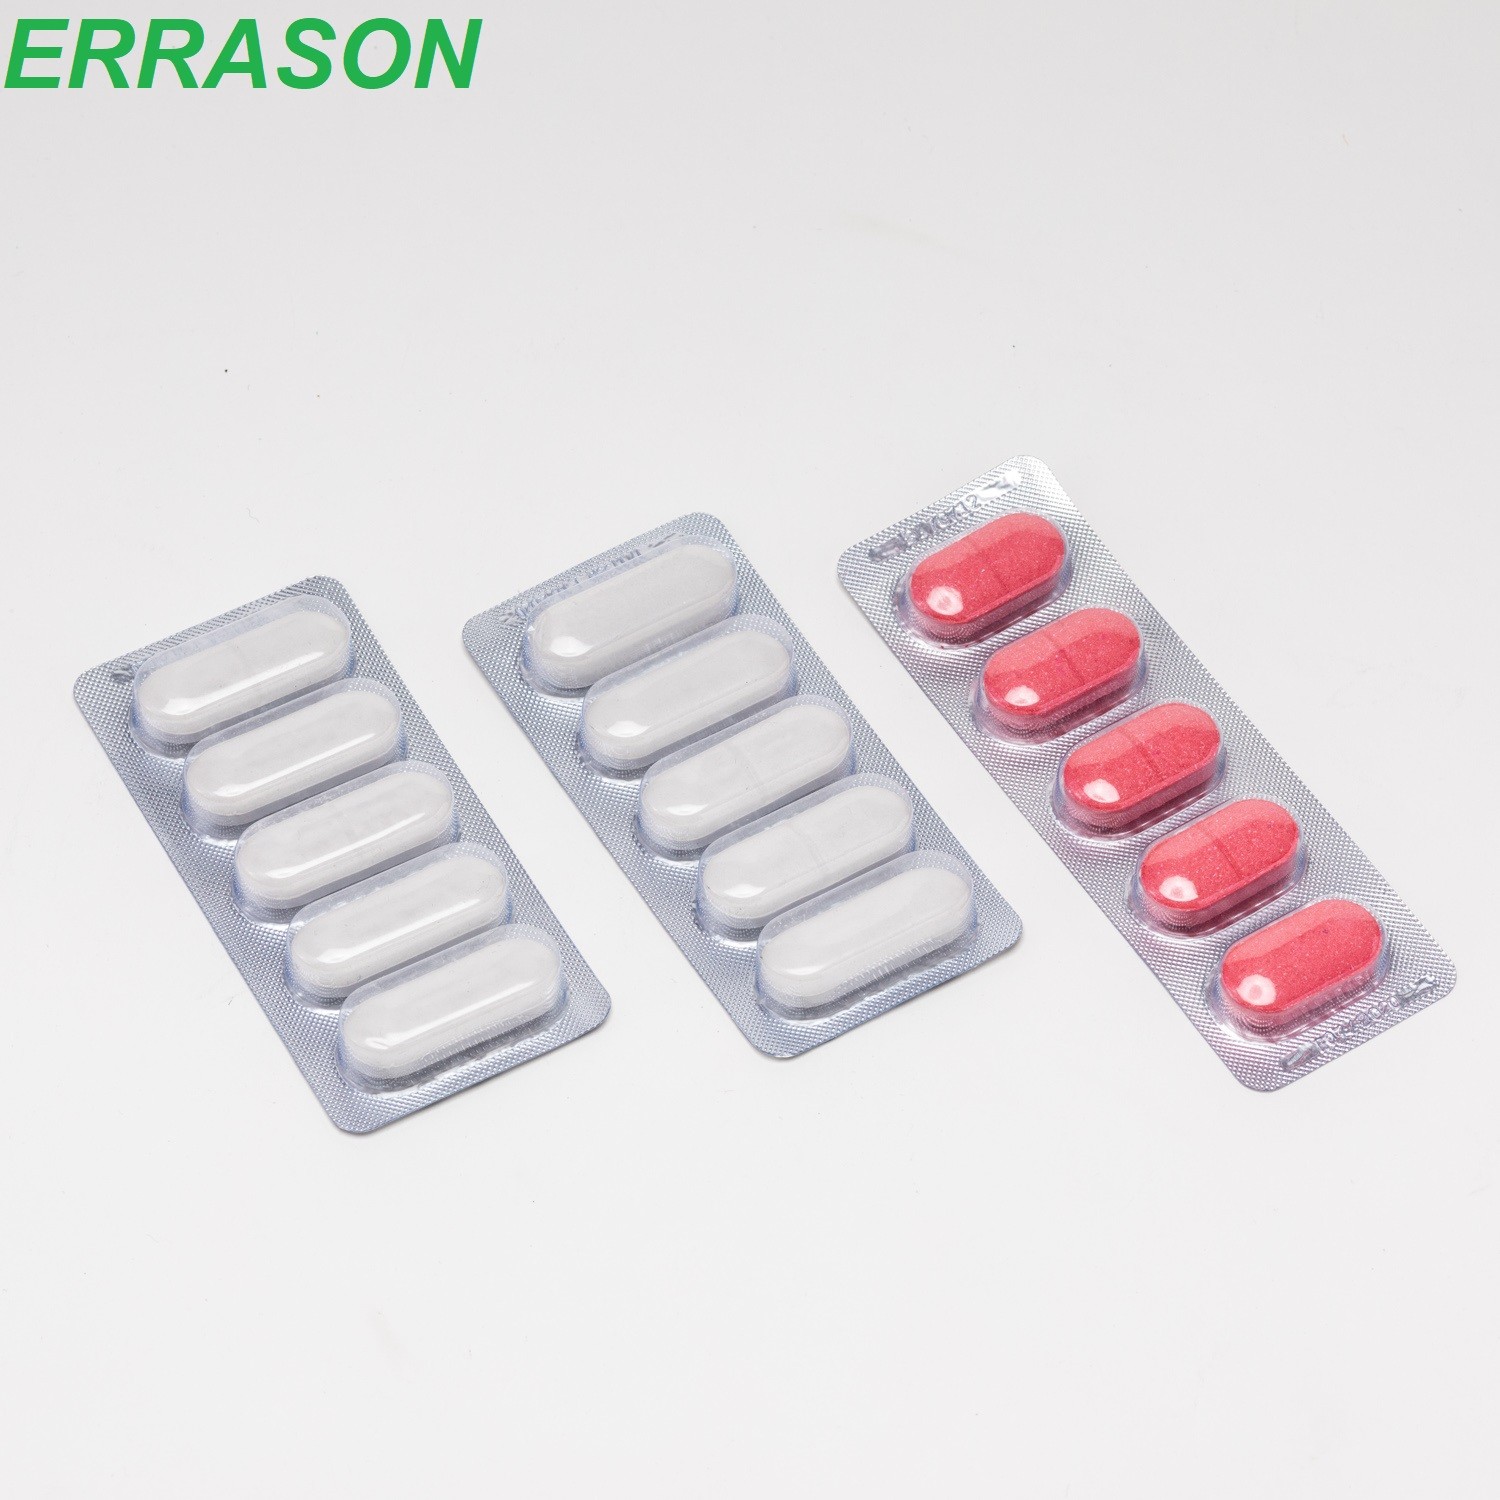 Abendazole tablet 300mg